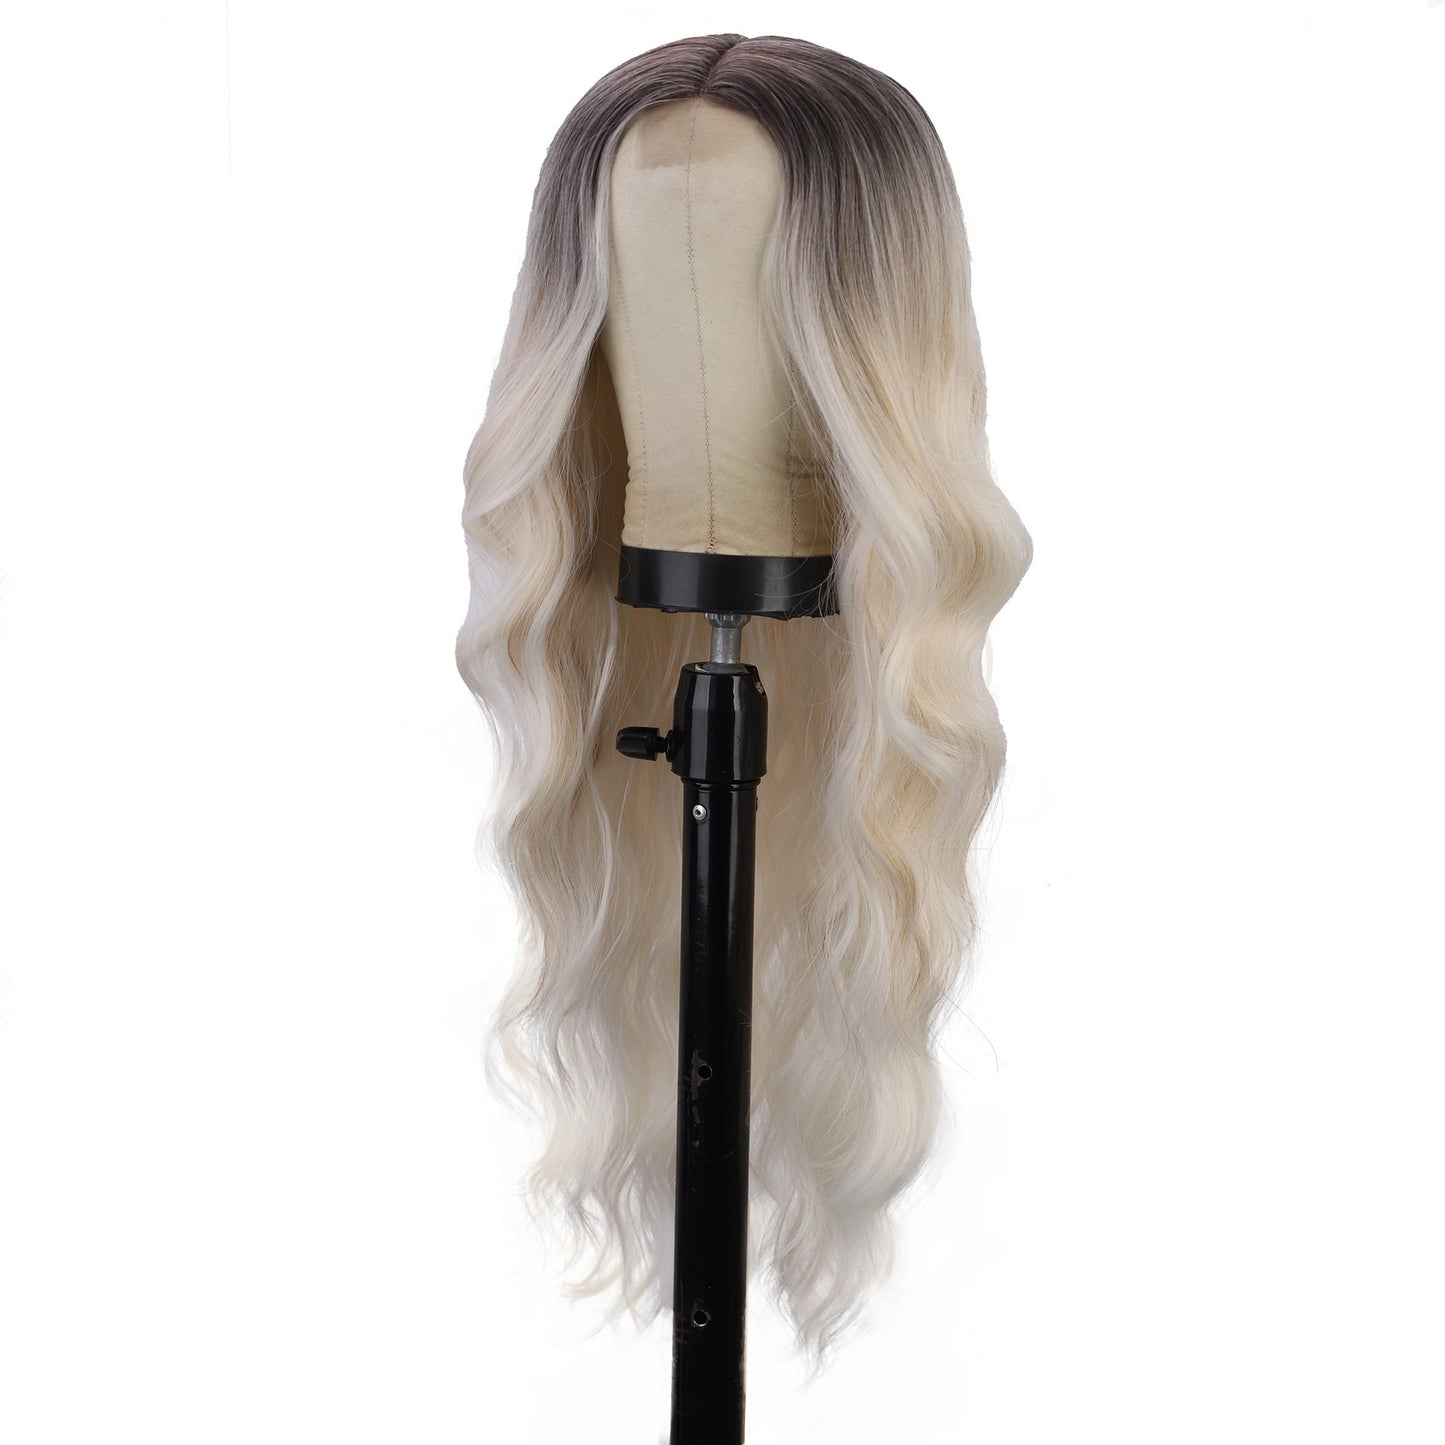 Chemical Fiber Wig Hair, European and American Wigs, Women's Long Curly Hair, Gradually Changing Color, Front Lace Wig Headband